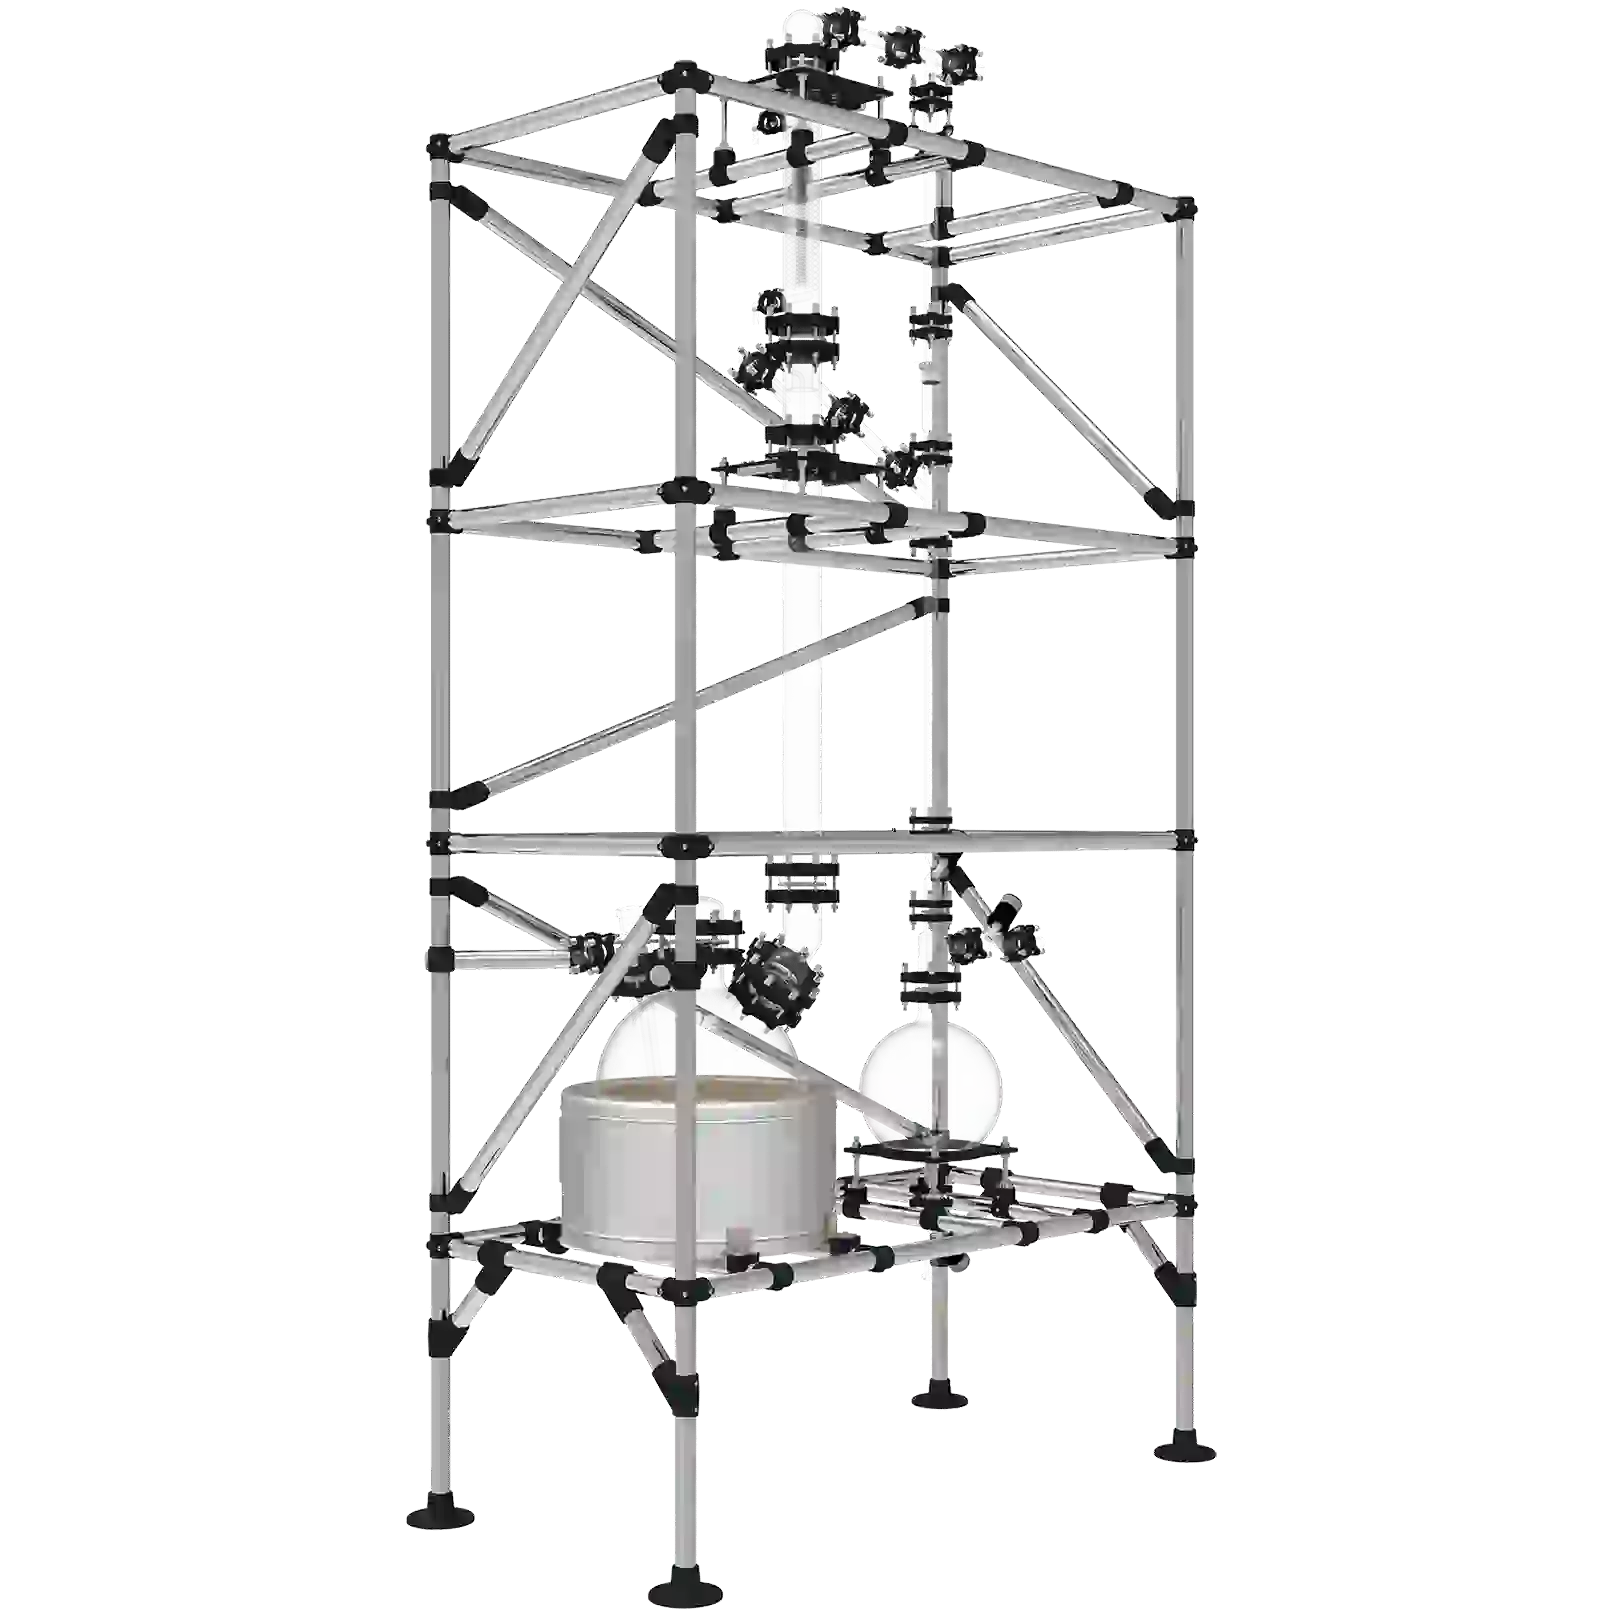 A high-resolution image of a modern vacuum distillation system with intricate piping and structural supports